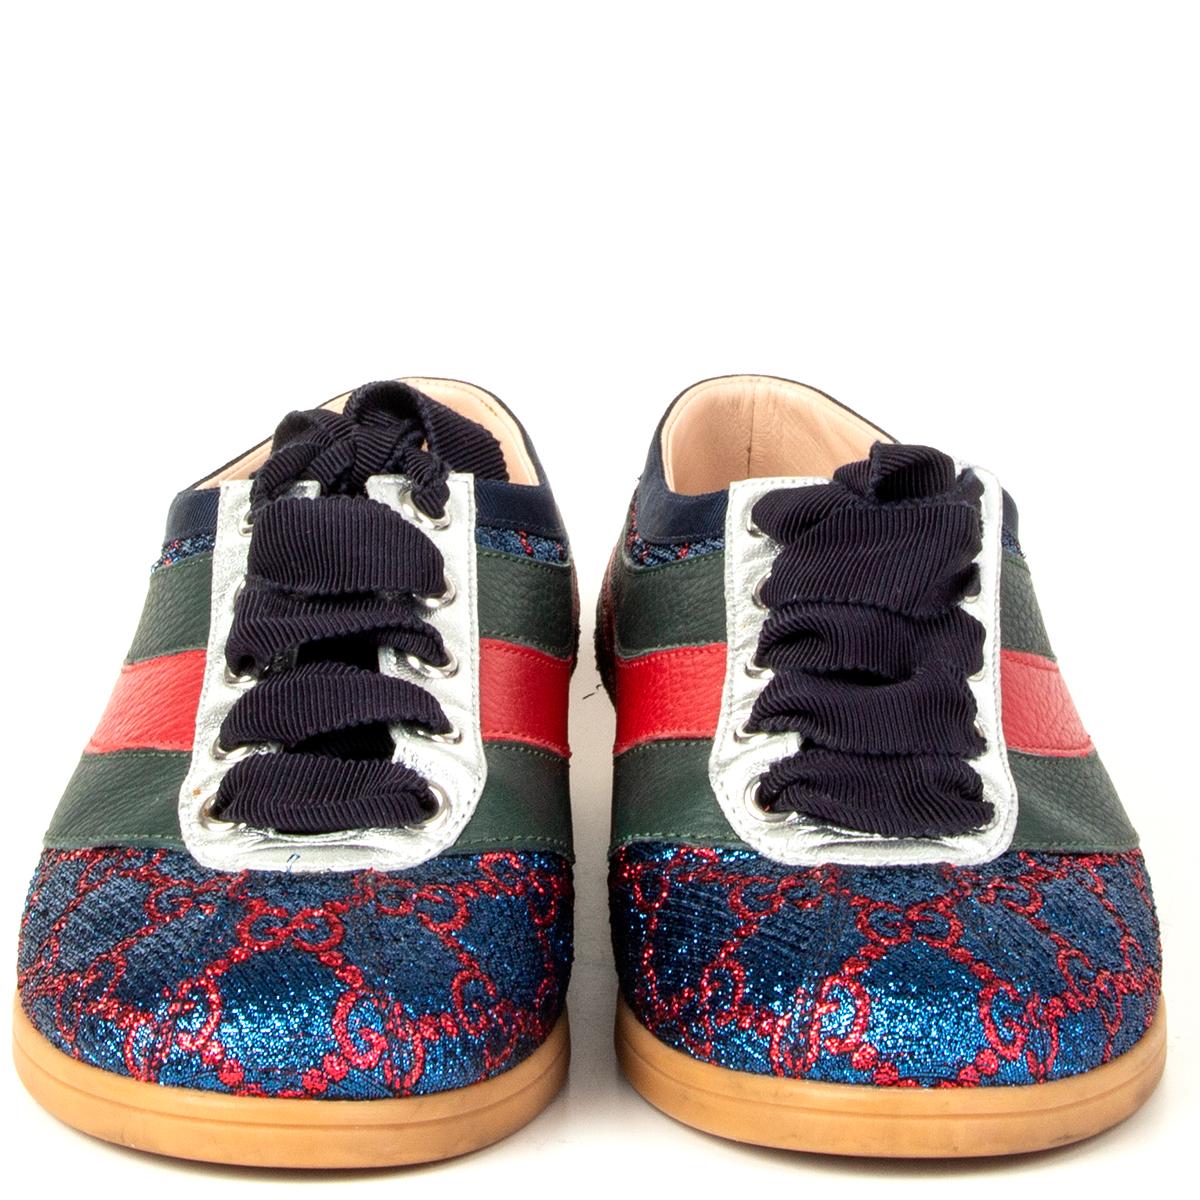 100% authentic Gucci 'Falacer Lurex Web' sneaker in blue and red lurex and green and red leather with ribbon shoe-lace in midnight blue. Iconic bee in golden lurex on the heel. Have been worn and are in virtually new